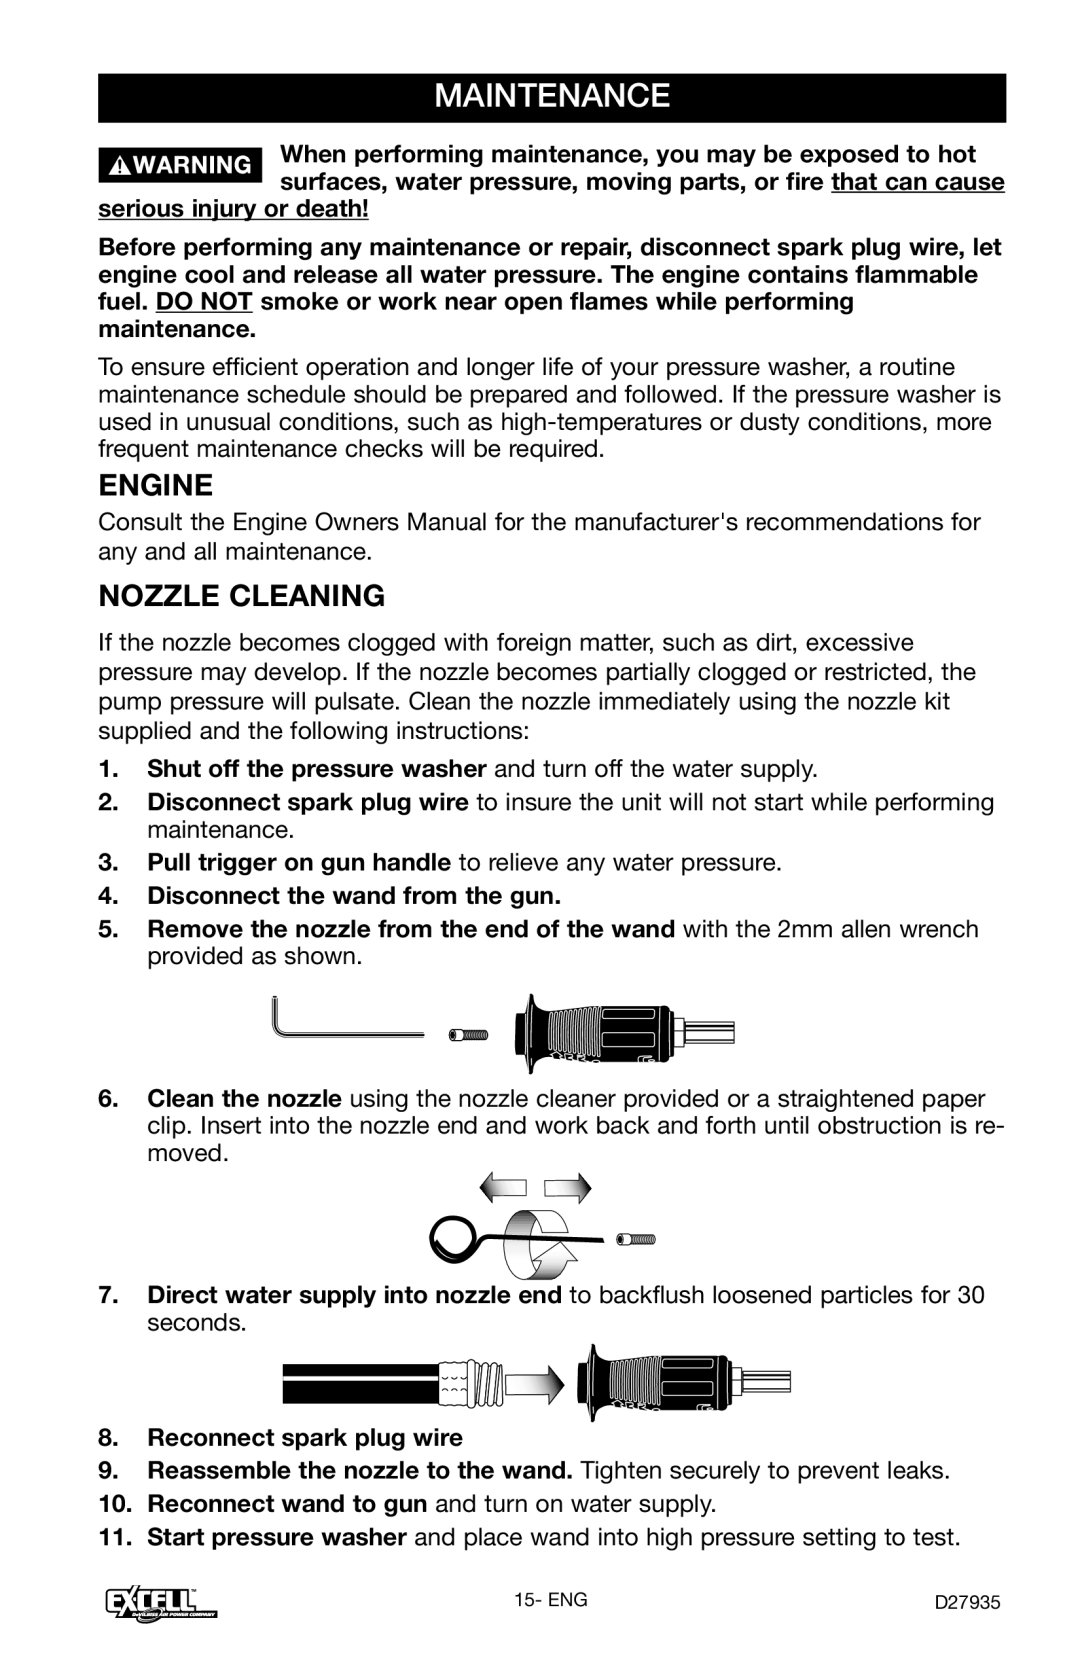 Excell Precision VR2300 operation manual Maintenance, Engine Nozzle Cleaning 